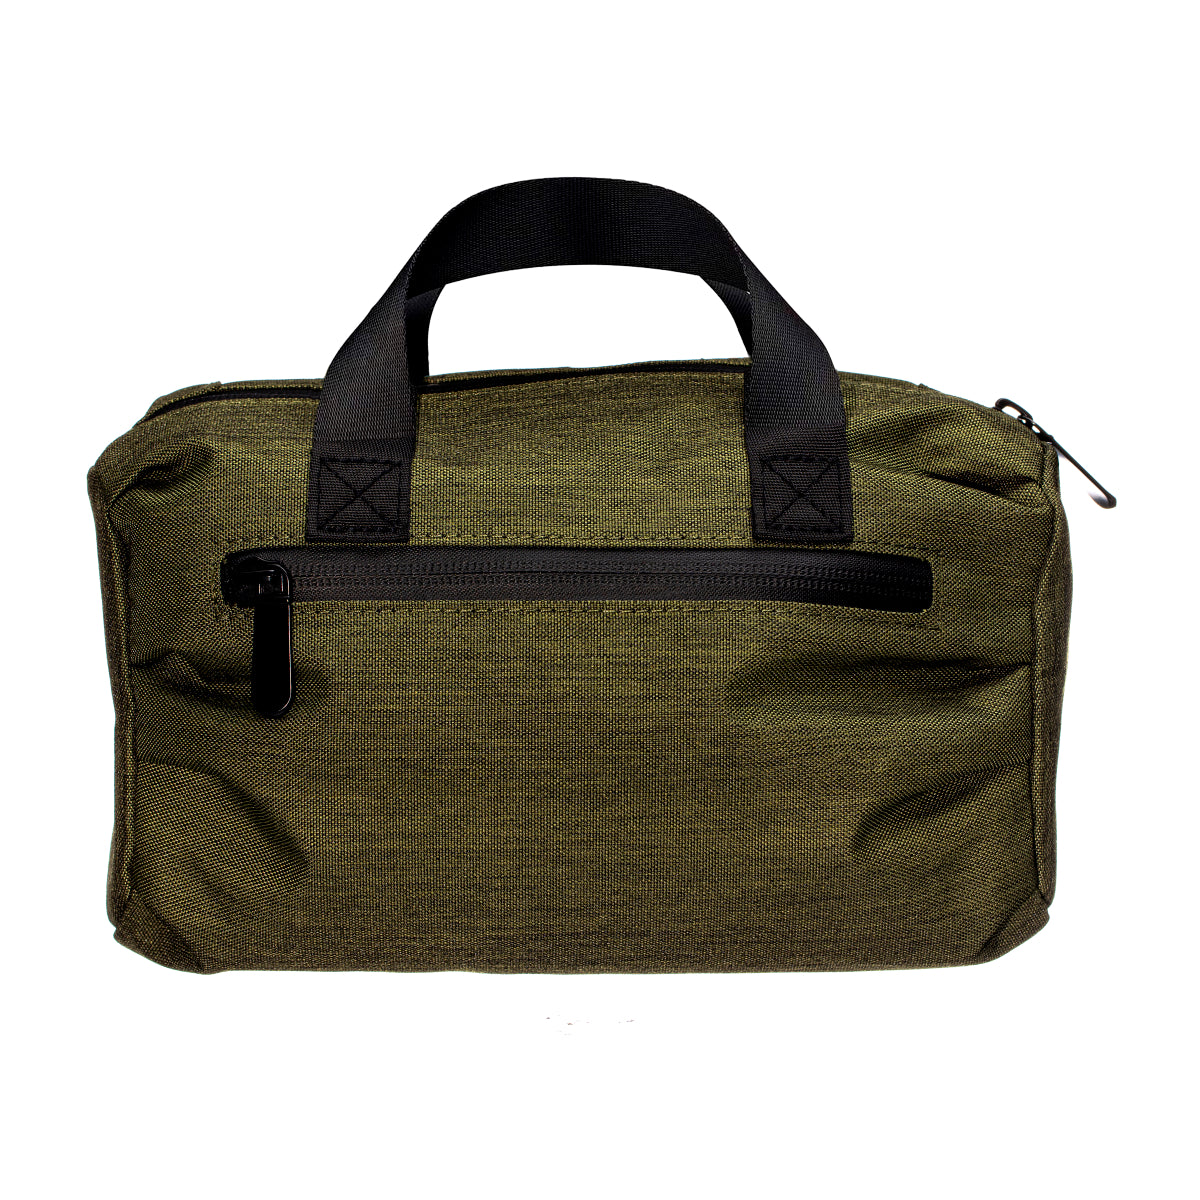 Marley Scent Free Bag